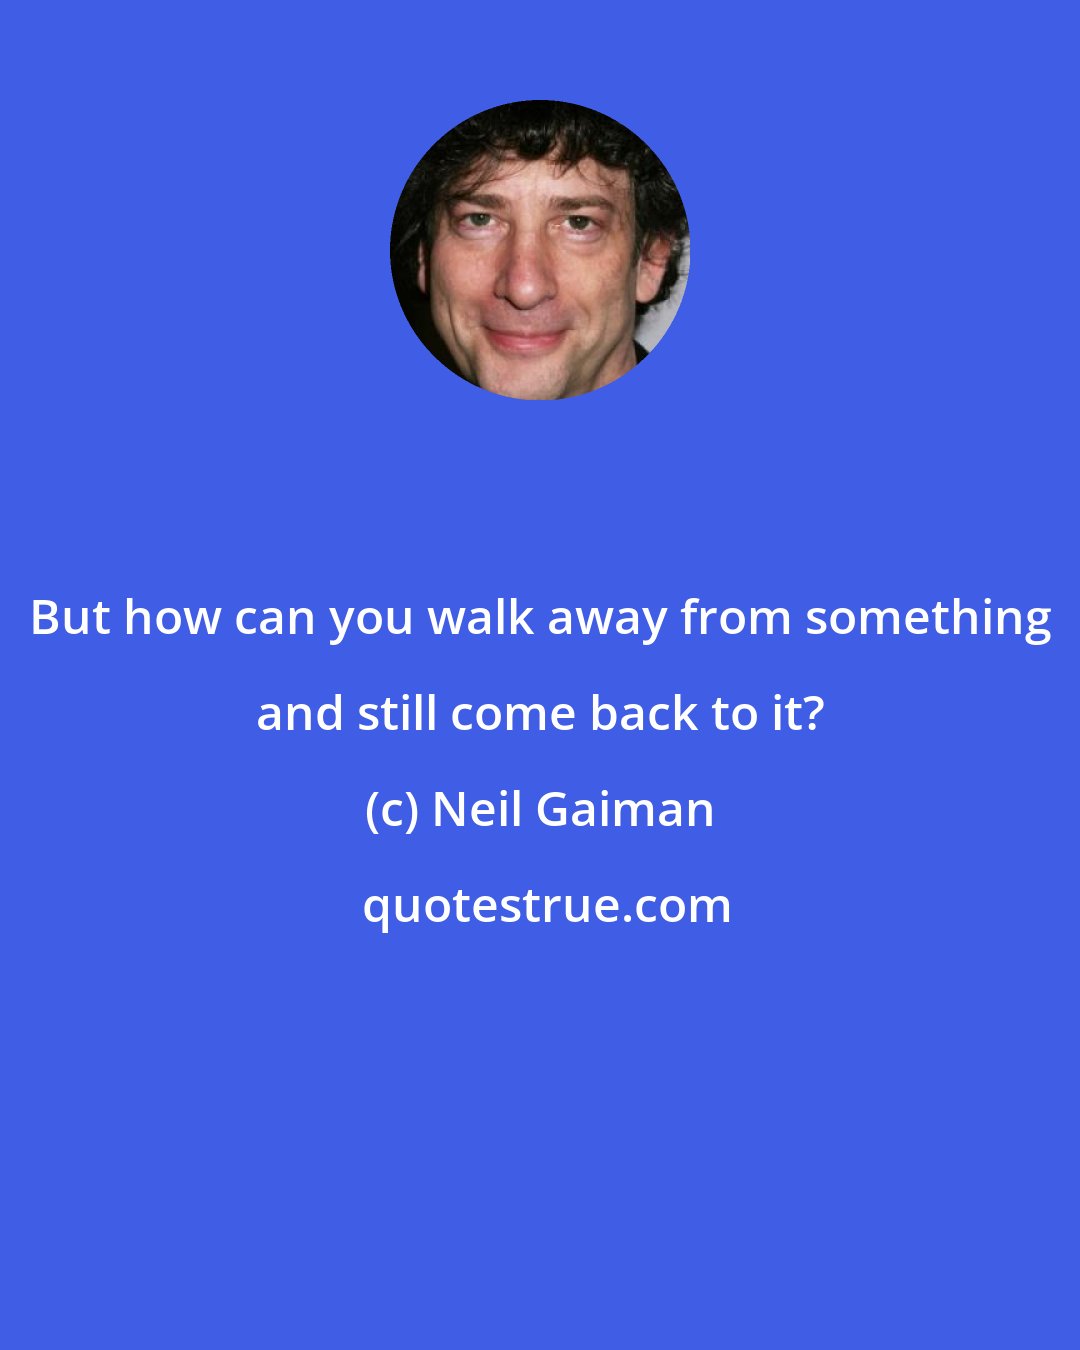 Neil Gaiman: But how can you walk away from something and still come back to it?